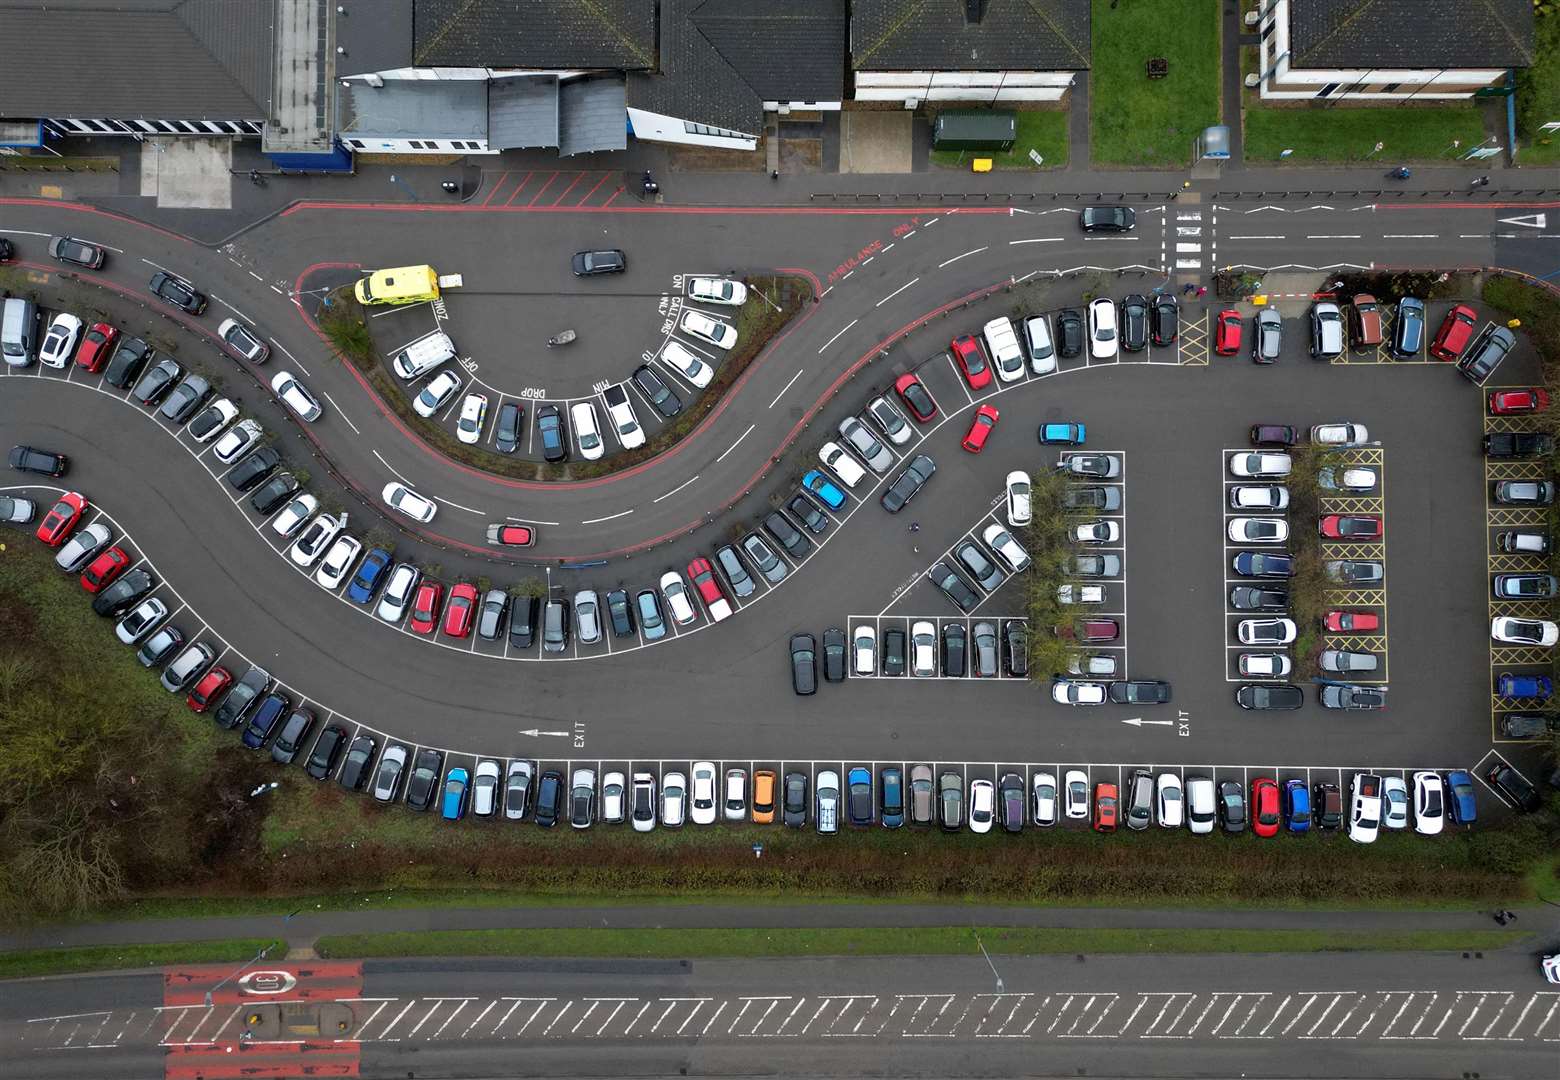 100 spaces were added to Maidstone Hospital’s visitor parking after complaints it was getting too busy. Picture: Barry Goodwin